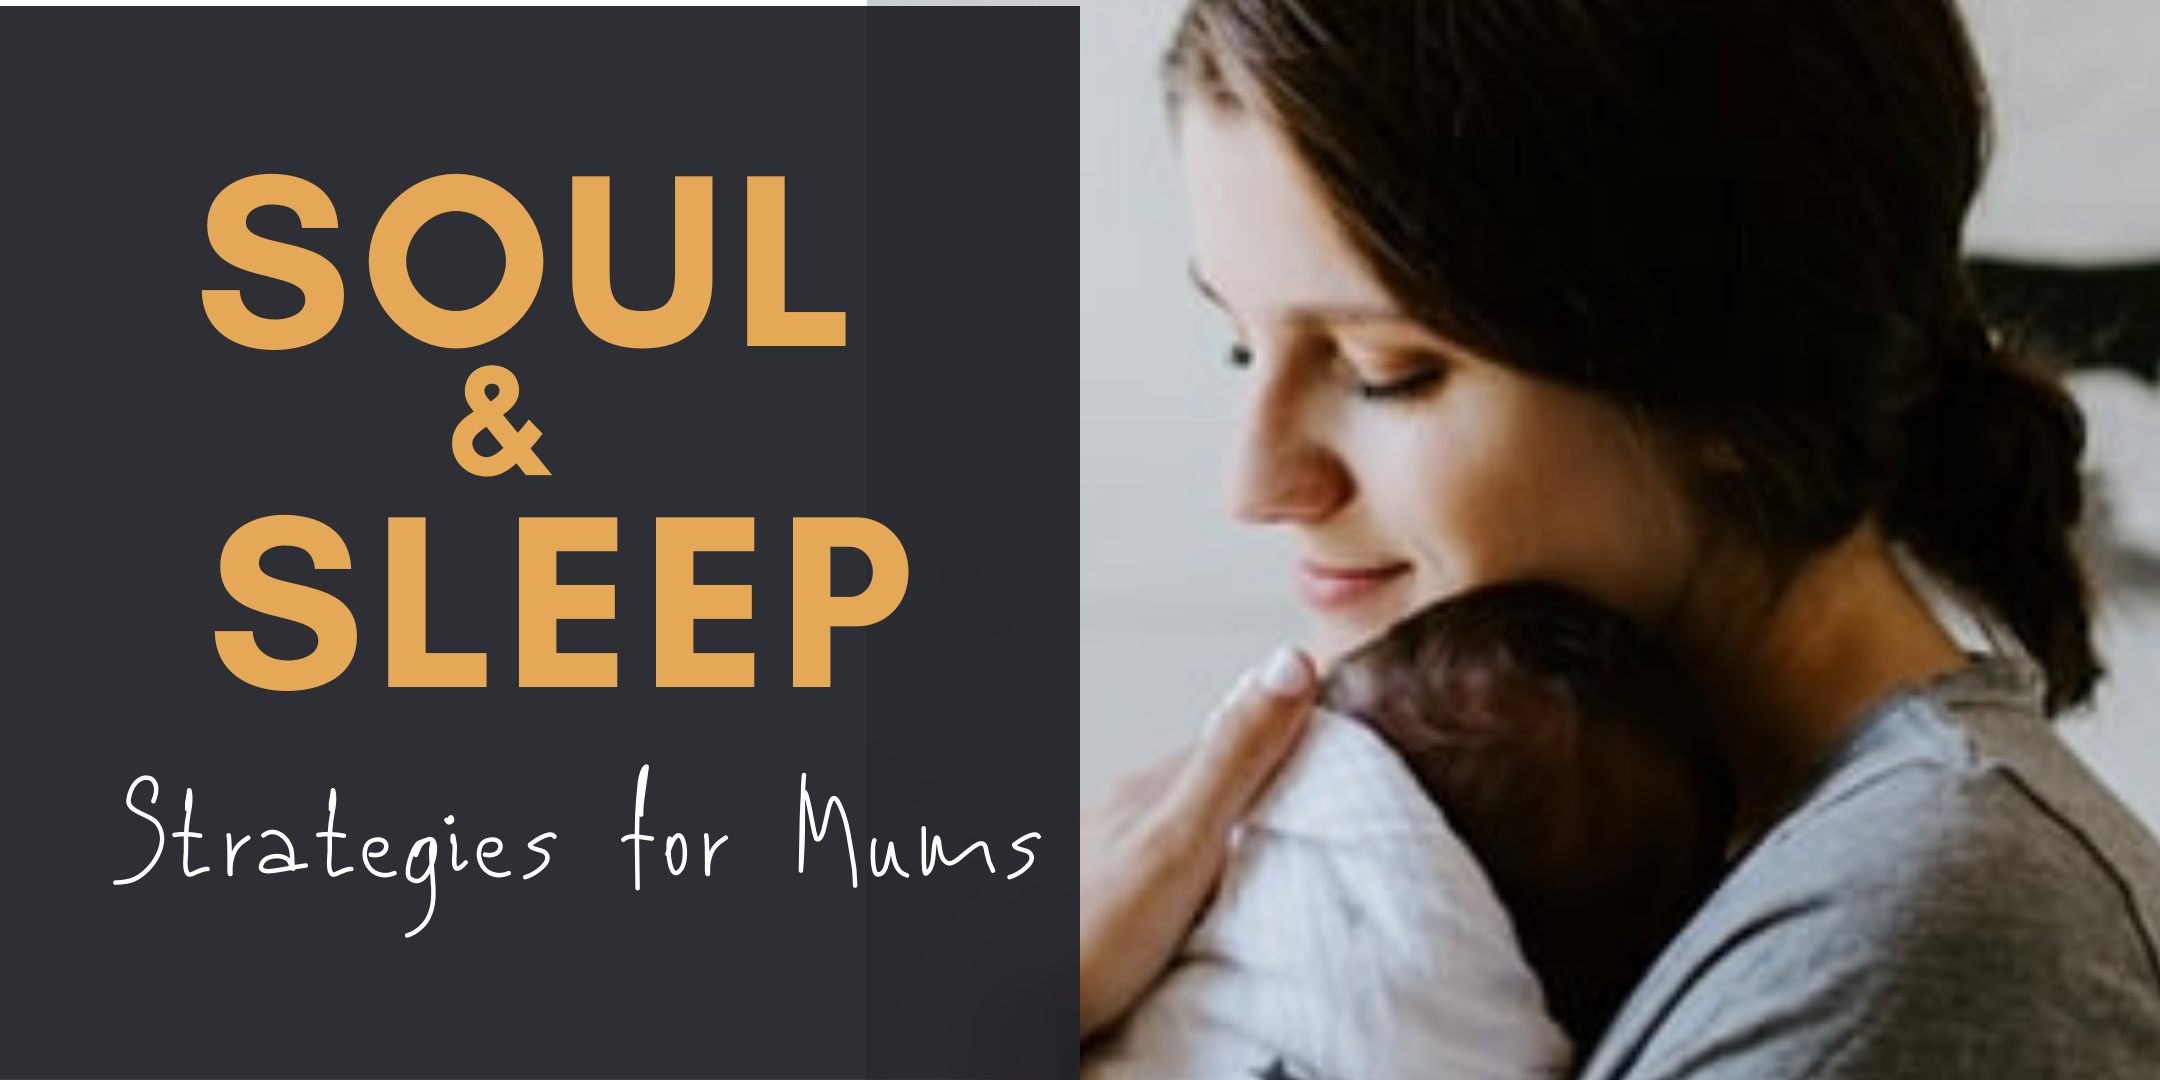 Sleep and Soul Strategies for Mums & Bubs